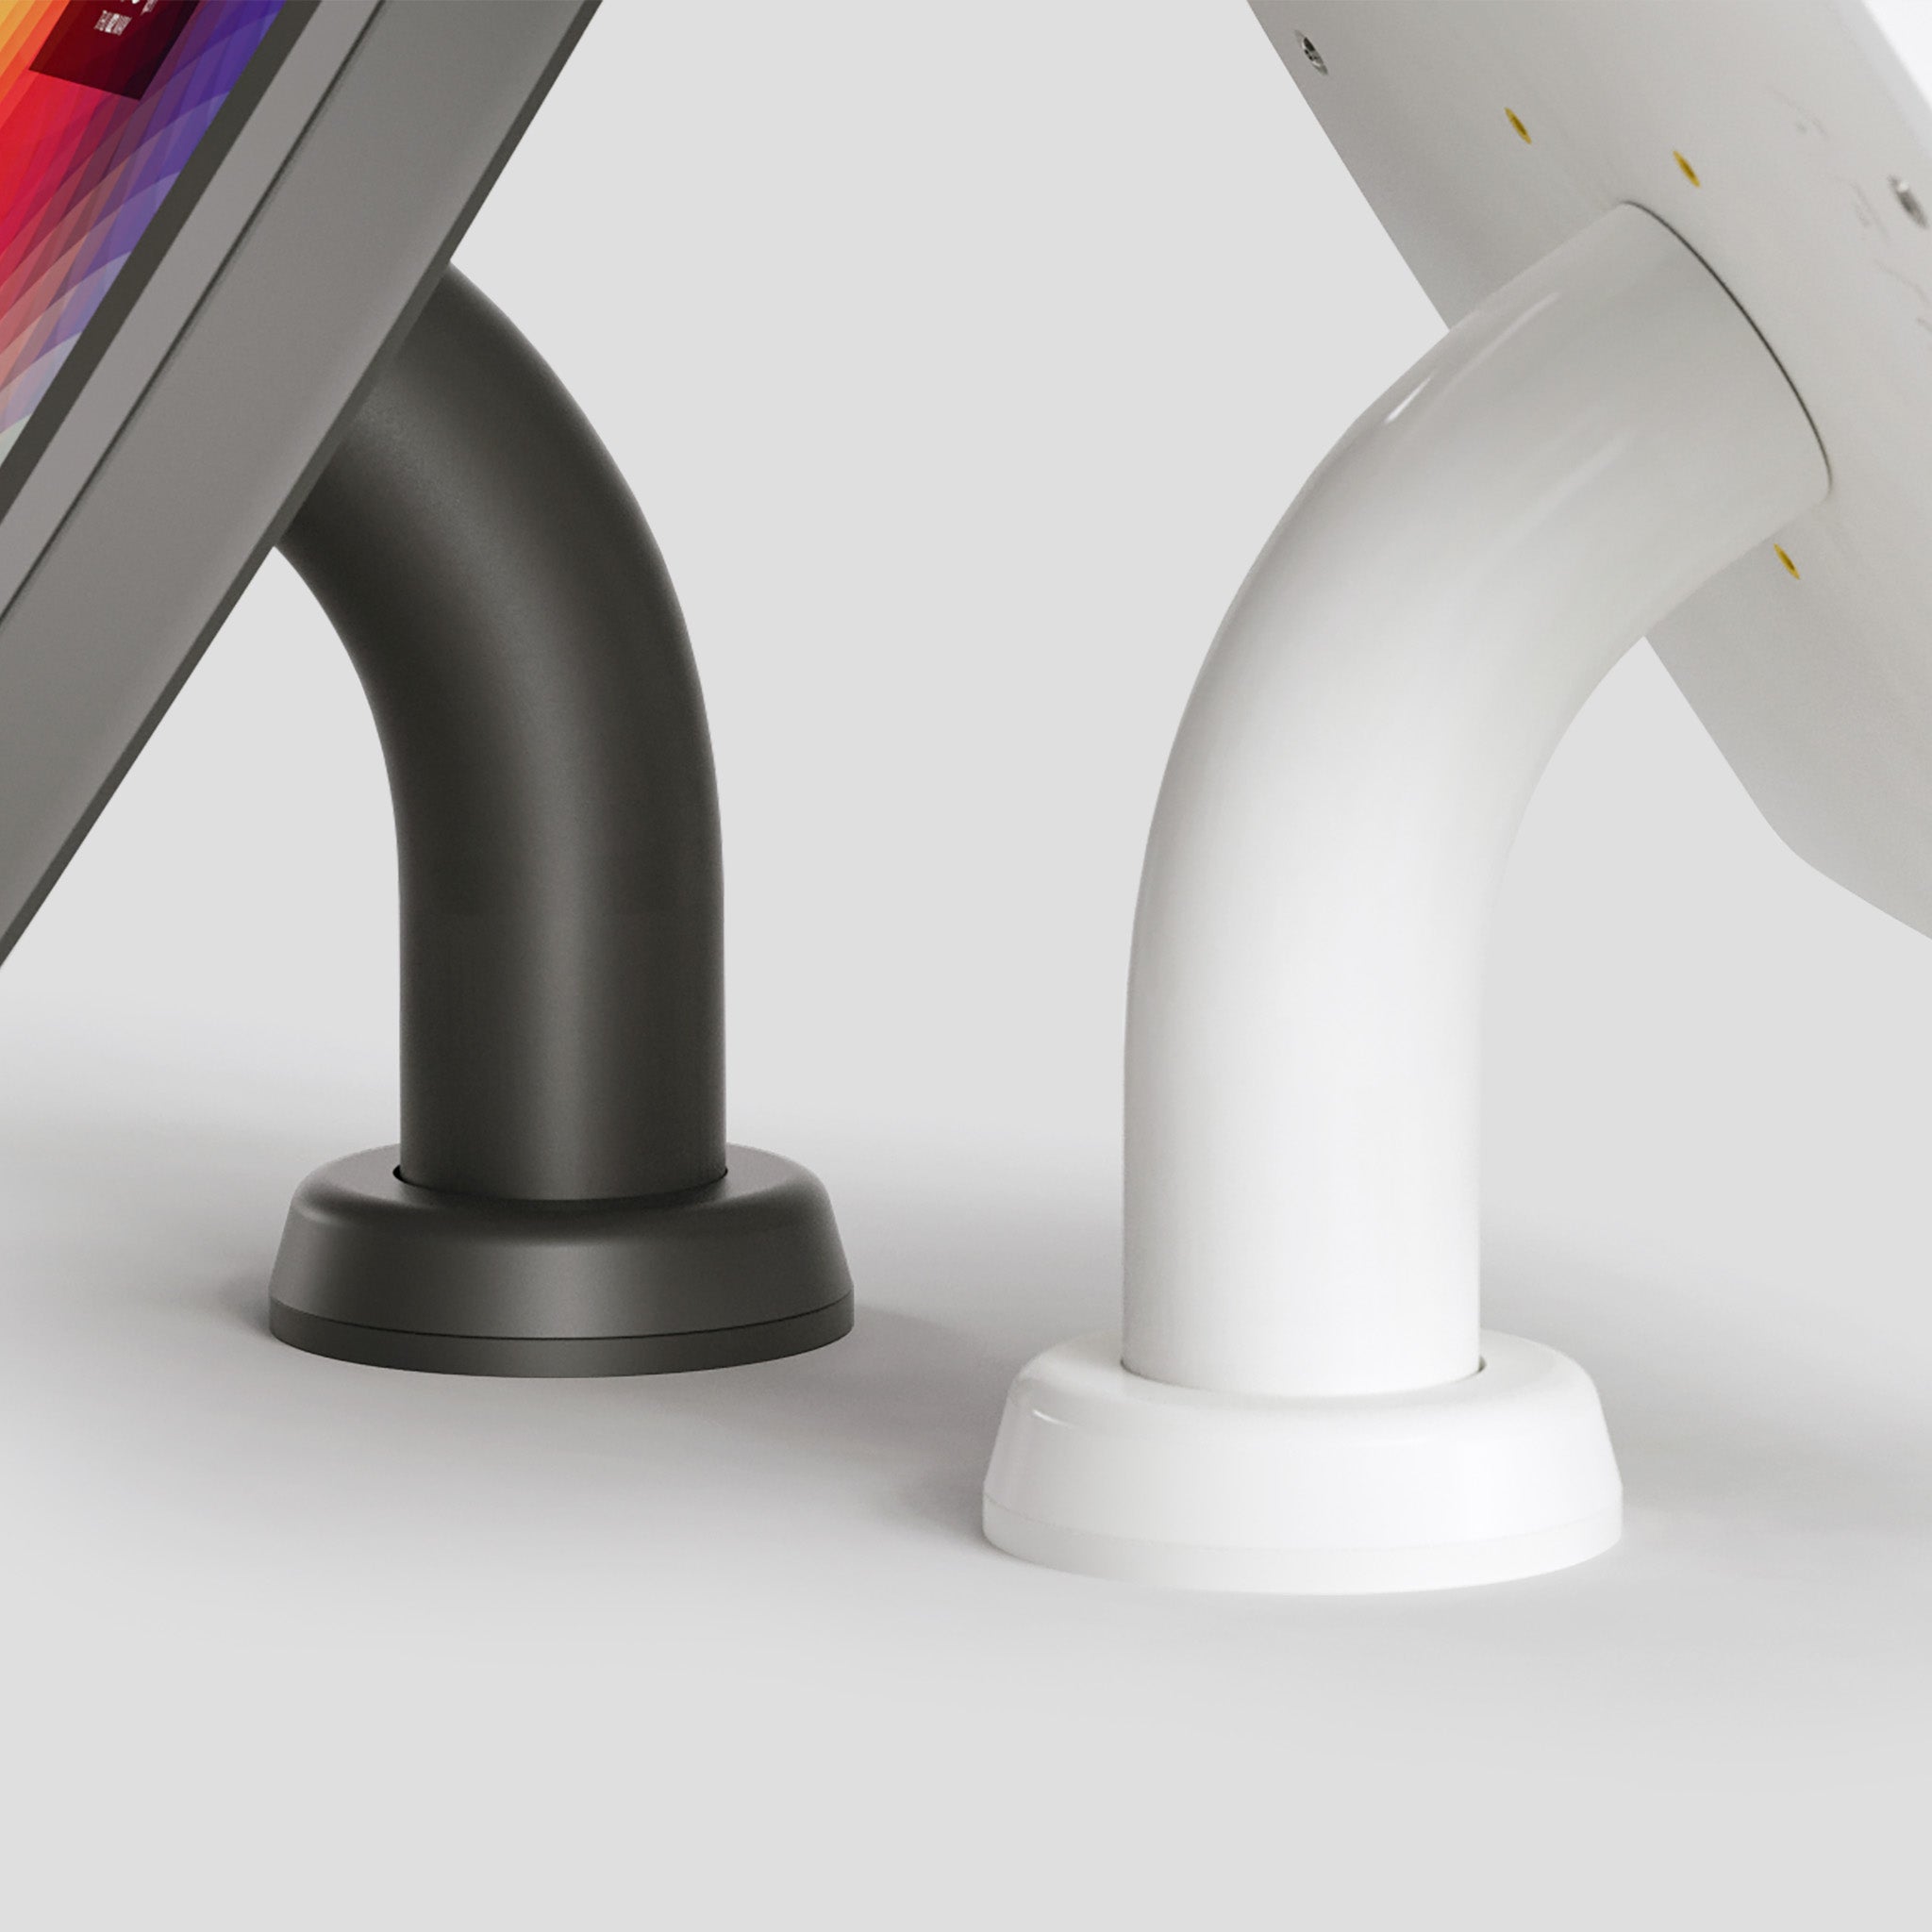 Armodilo Surface Swivel Stands attached to tablet enclosures in black and white